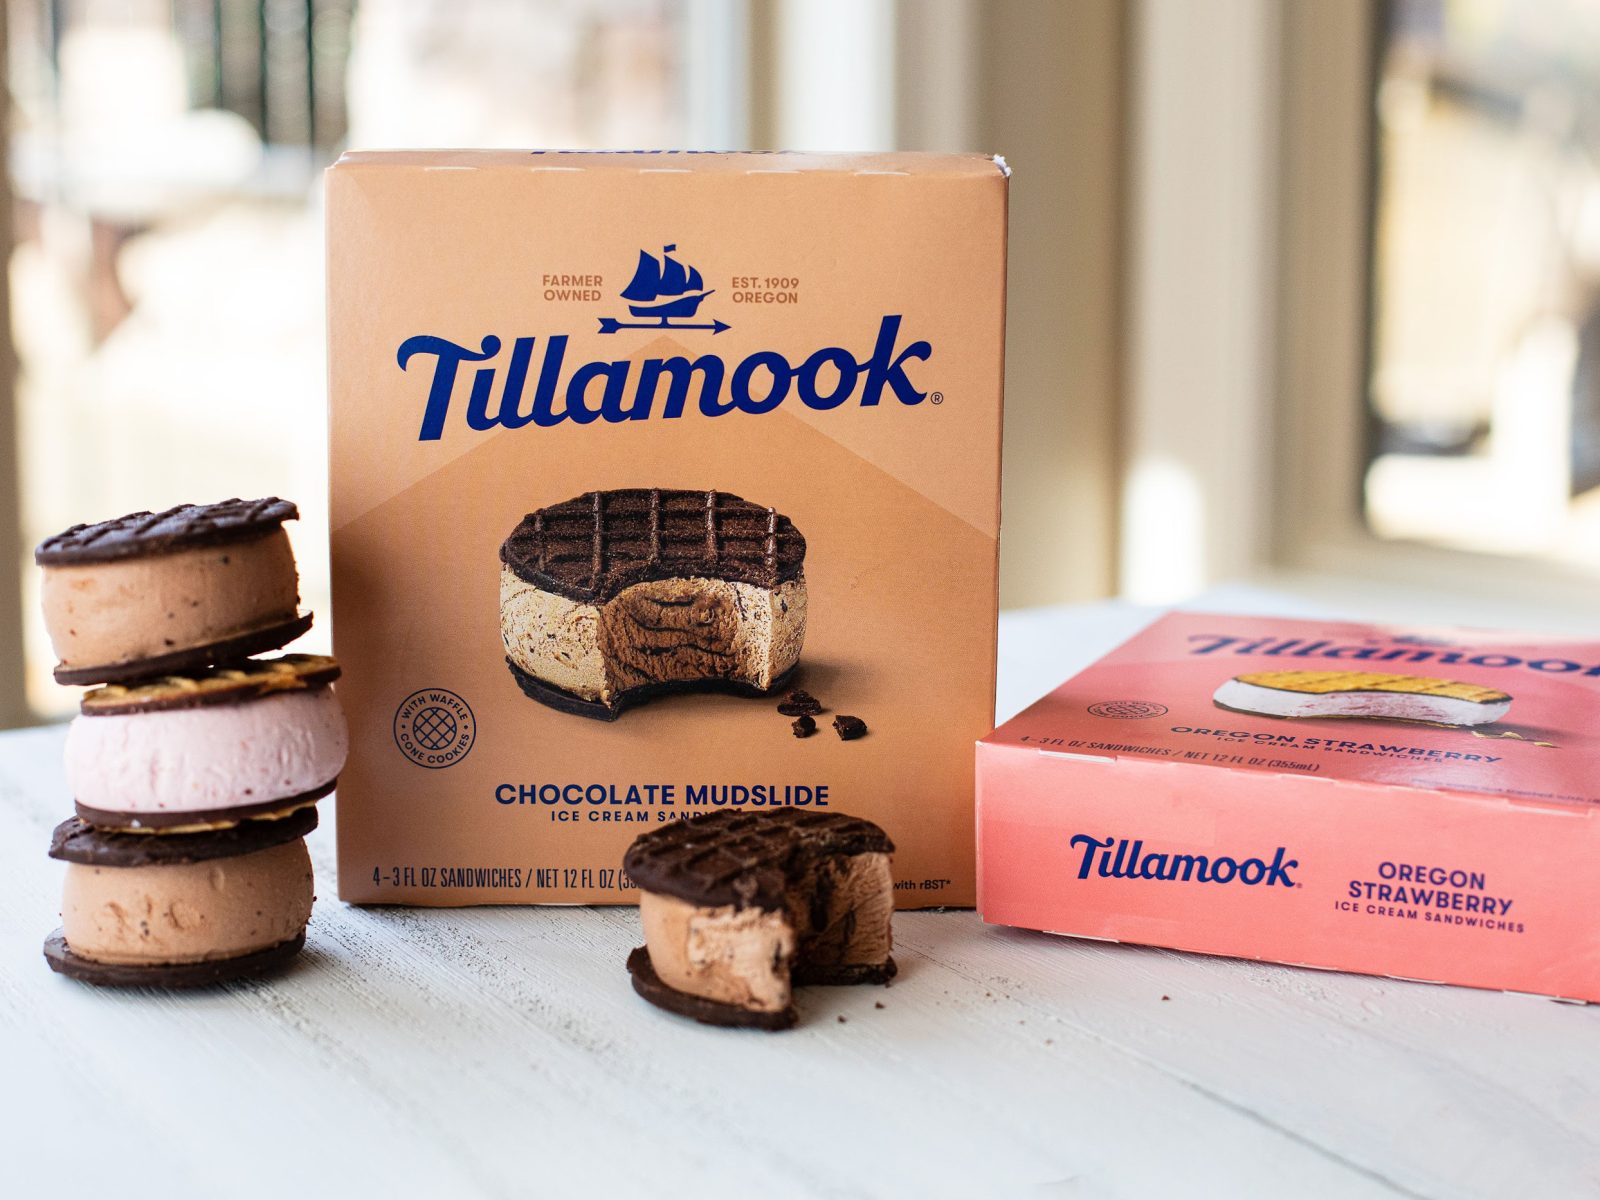 Tillamook Ice Cream Sandwiches As Low As $2.24 At Kroger